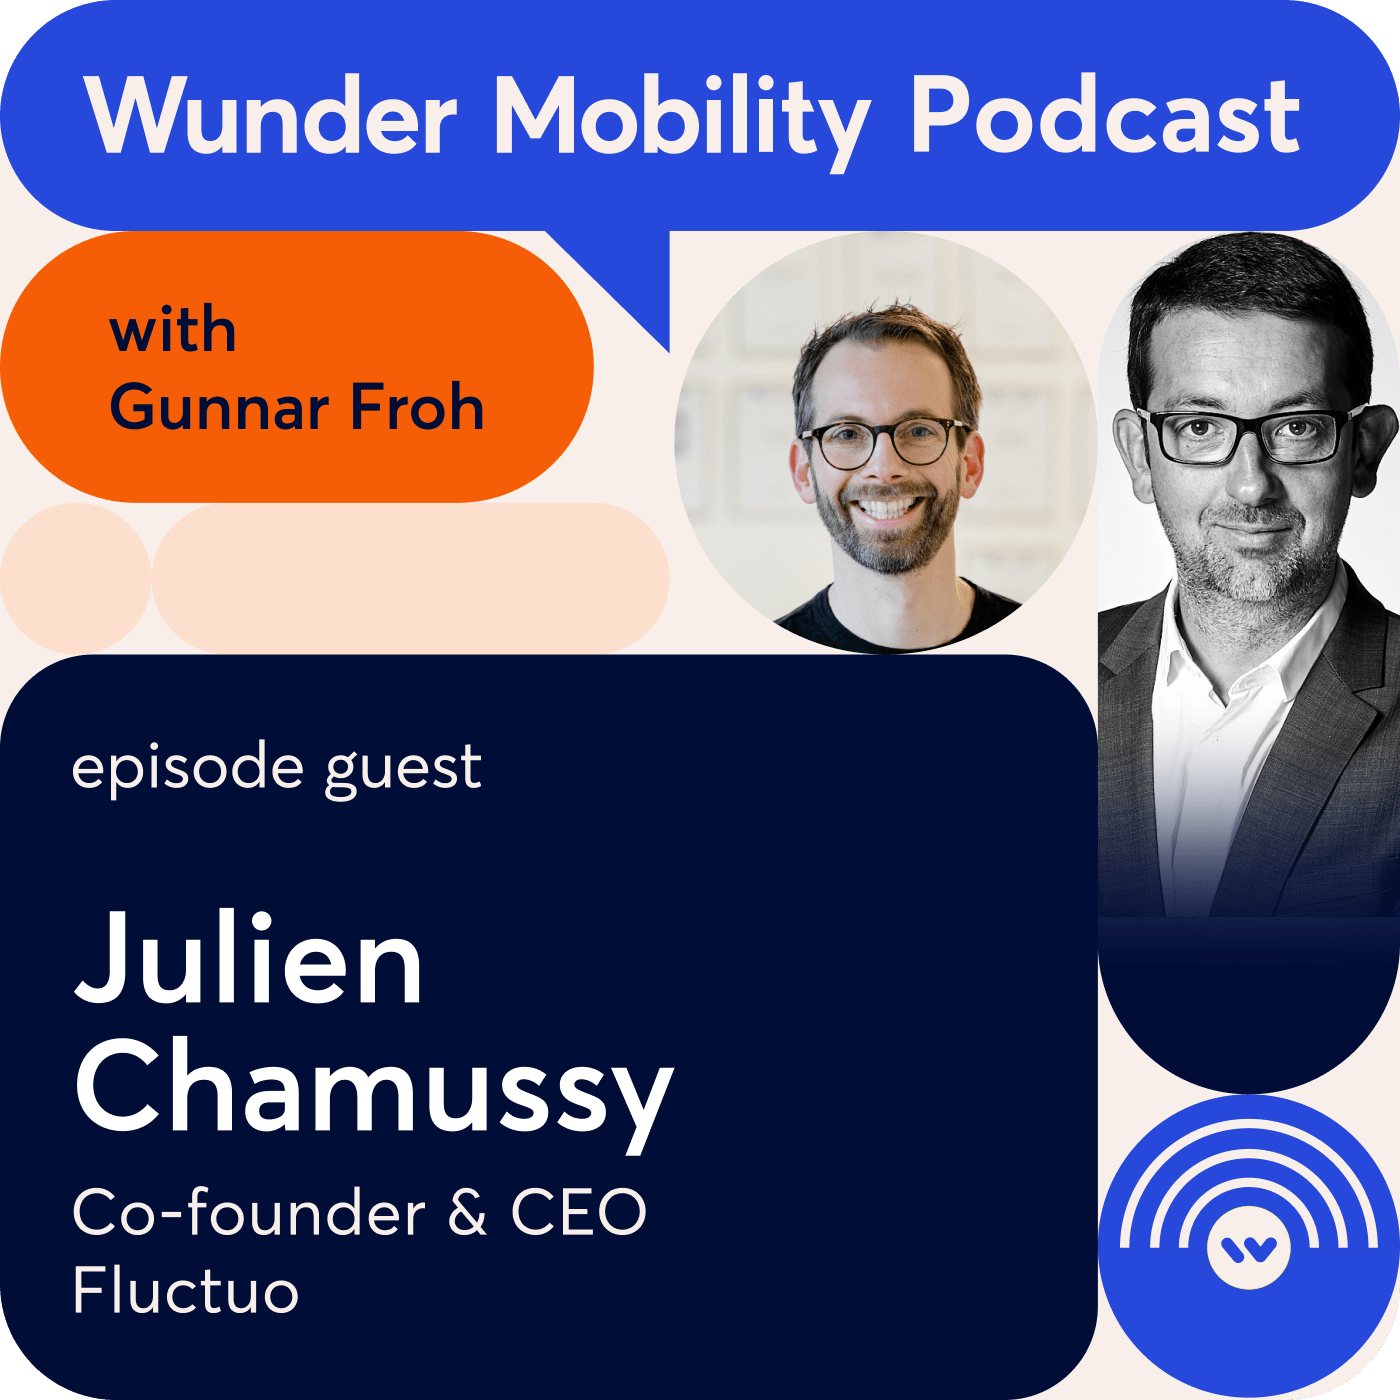 Wunder Mobility Podcast template of Julien Chamussy, co-founder and CEO of Fluctuo featured with Gunnar Froh in images shaped as bubbles.